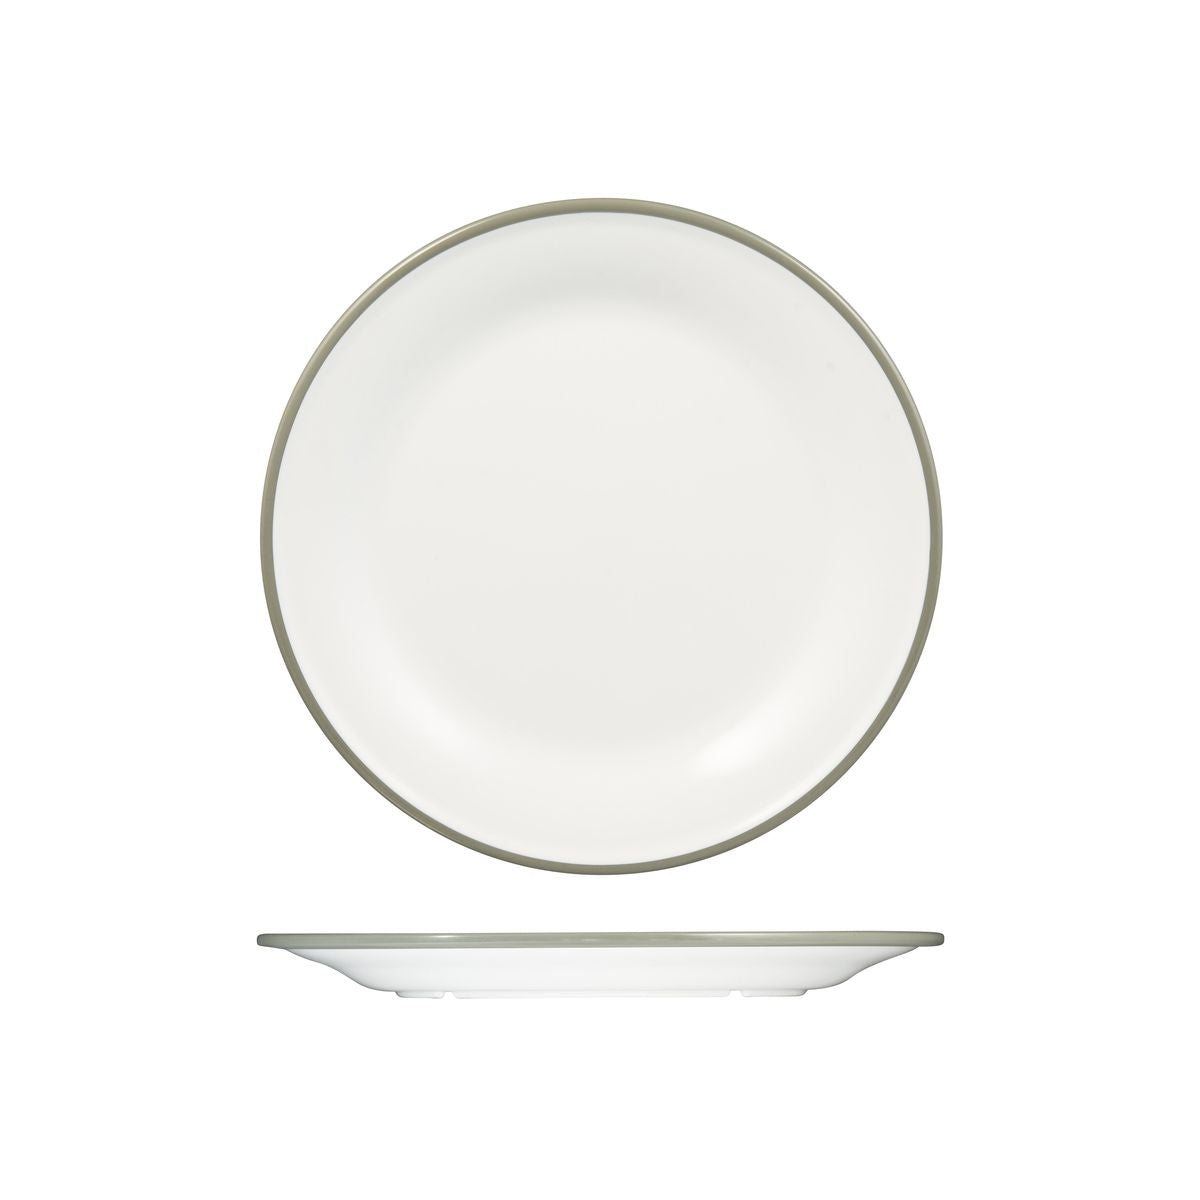 Round Plate, 270mm, Melamine - White & Grey from Ryner Melamine. Sold in boxes of 12. Hospitality quality at wholesale price with The Flying Fork! 